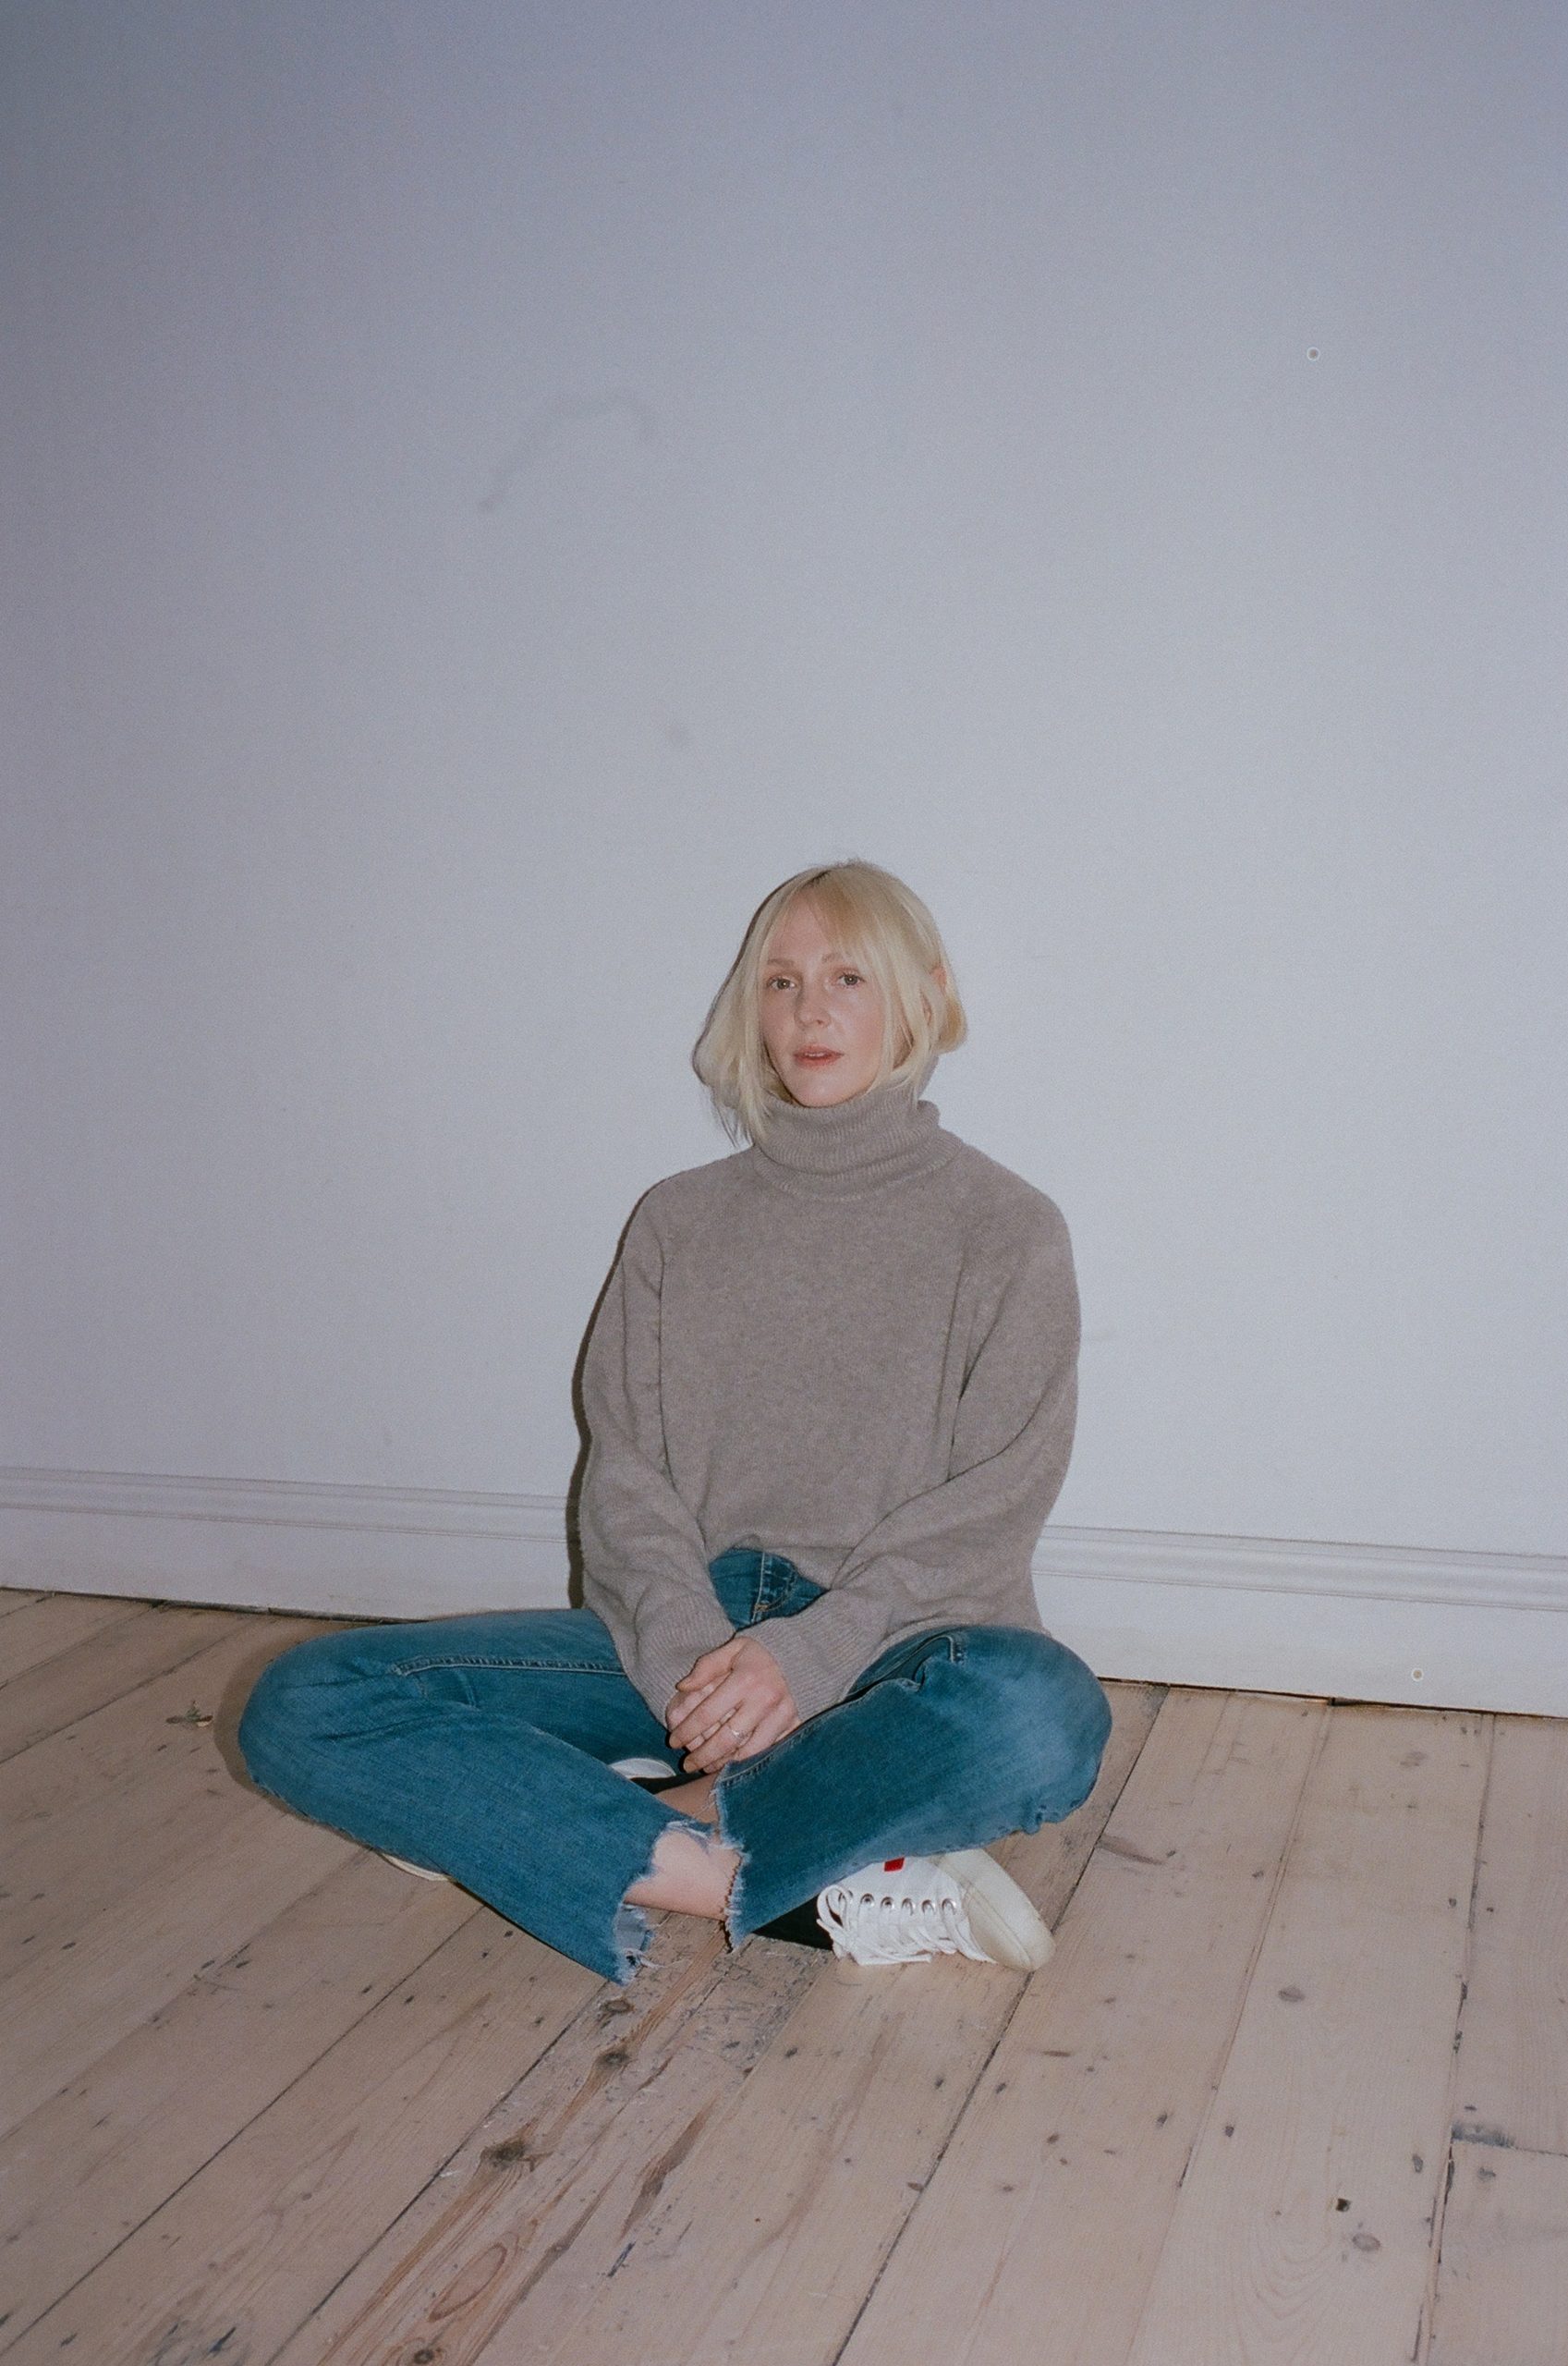 LAURA MARLING Announces new album, 'Song For Our Daughter', due for release this Friday 1